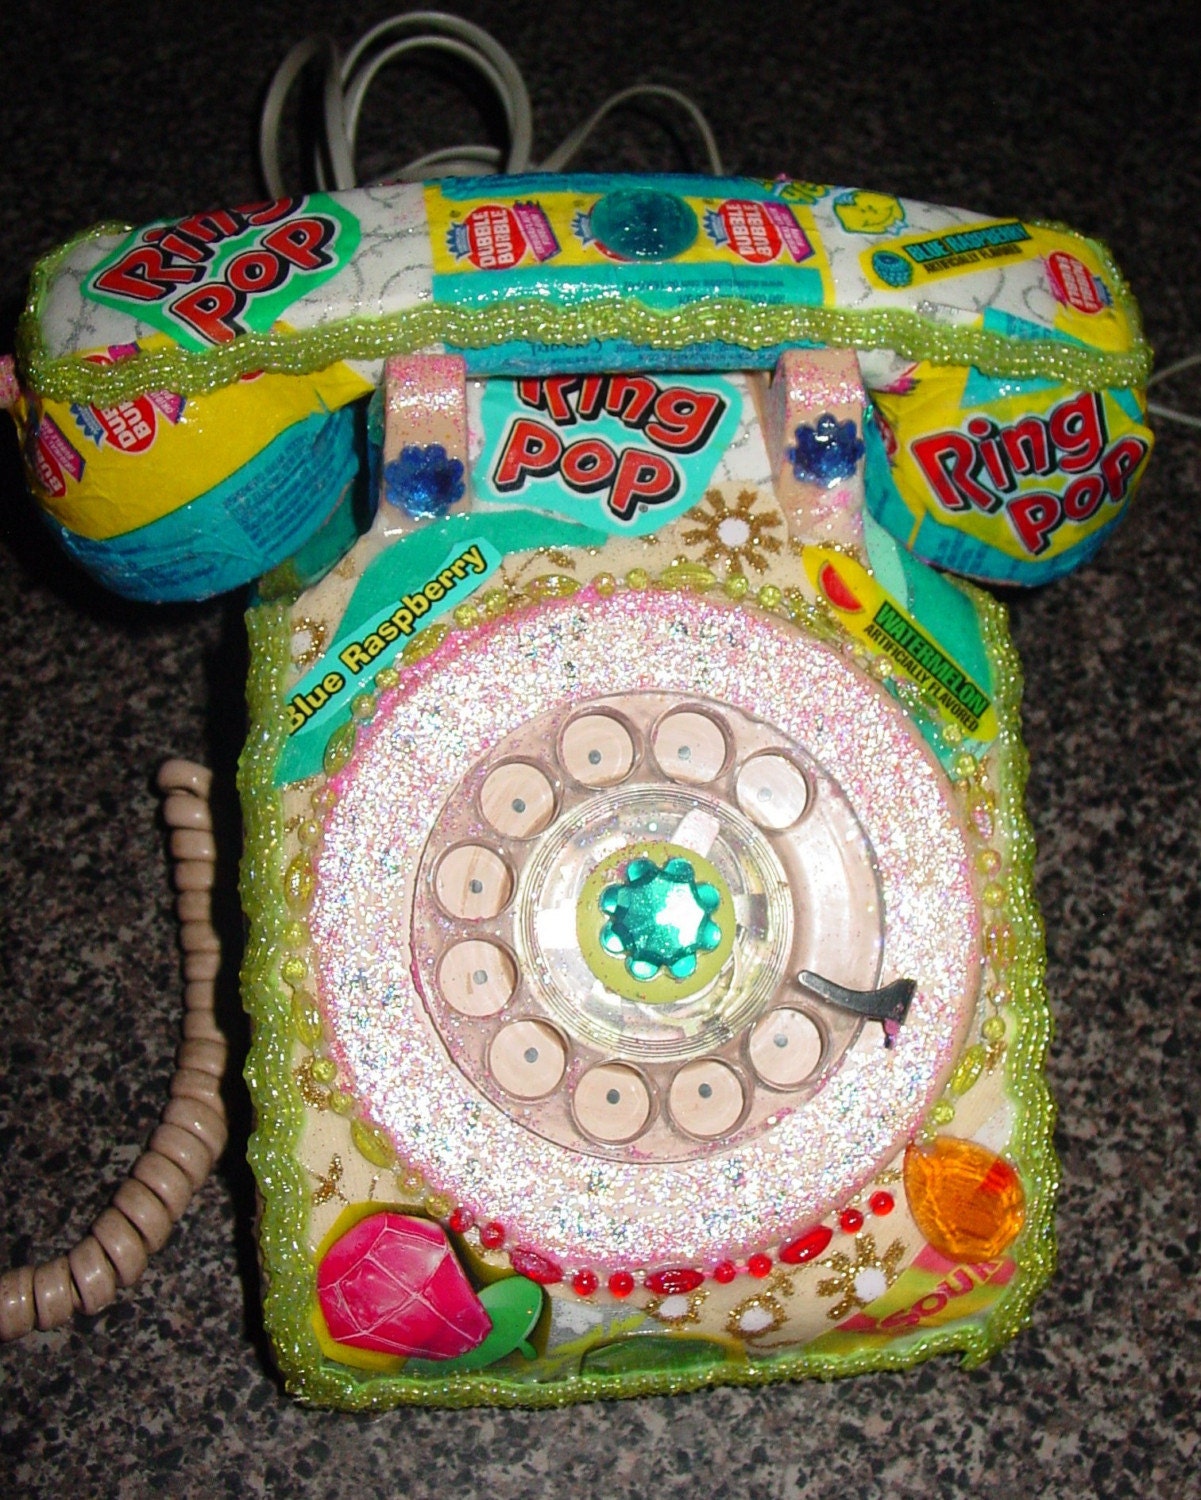 recycled vintage dial phone by C.Reinke RING POP candy wrappers.Kitsch at its best